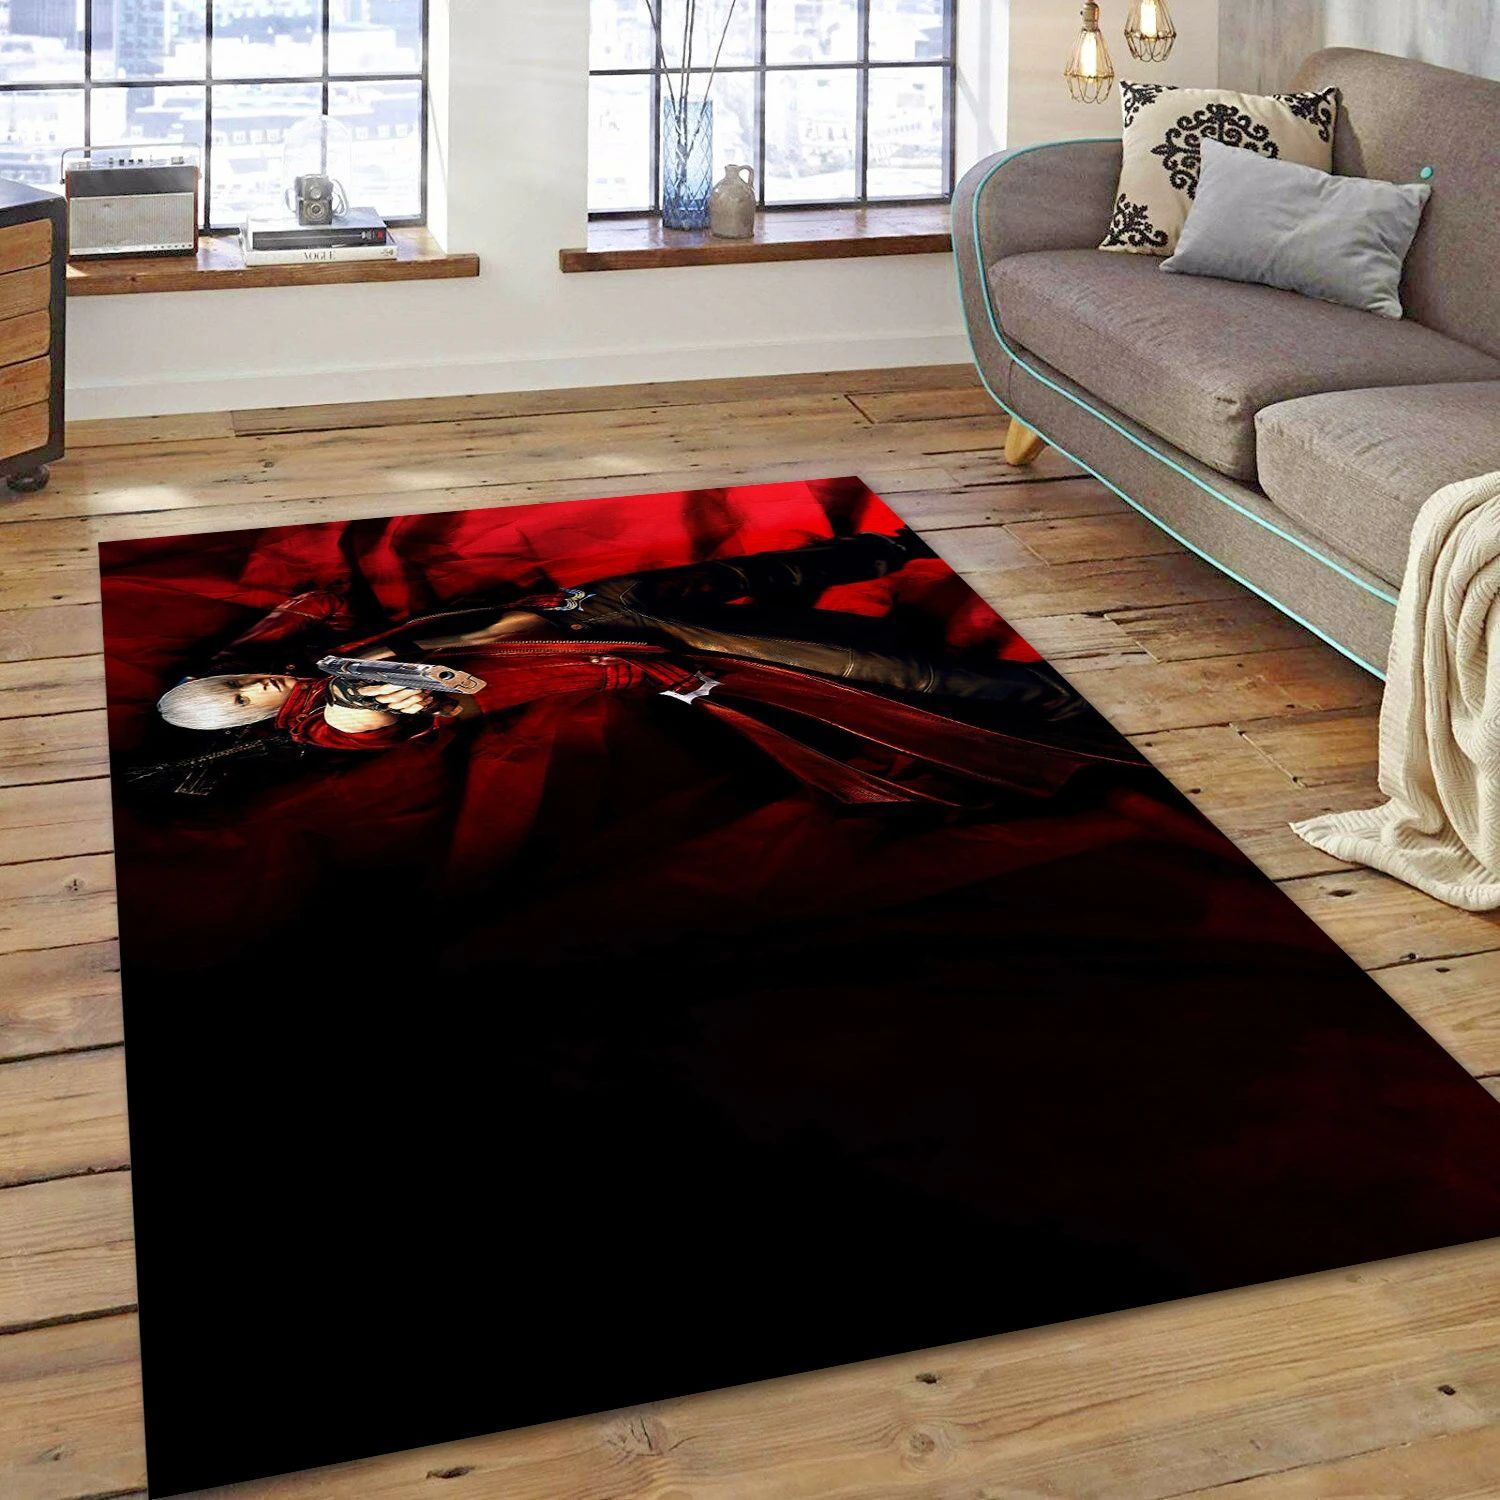 Devil May Cry 3 Dantes Awakening Video Game Area Rug For Christmas, Bedroom Rug - Home Decor Floor Decor - Indoor Outdoor Rugs